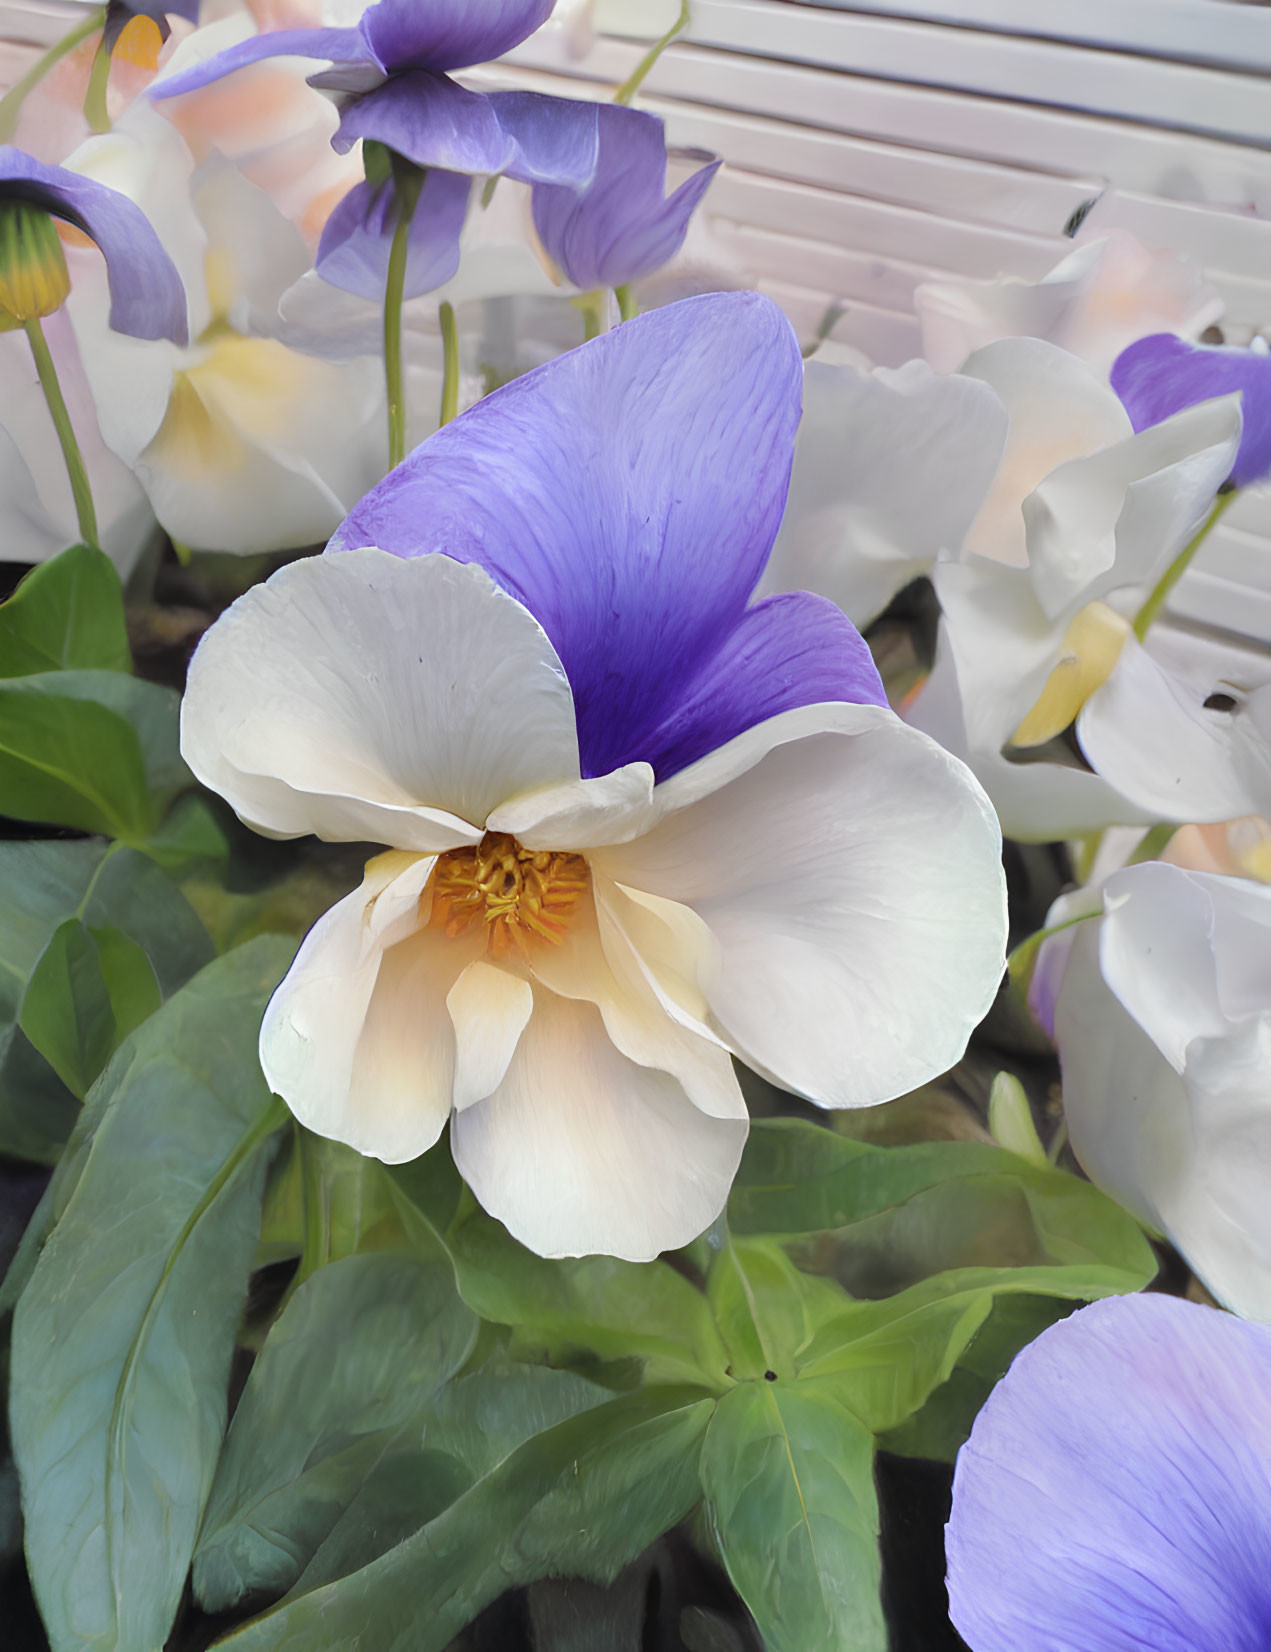 Bicolored violet and white flower with golden center among green leaves and blooms